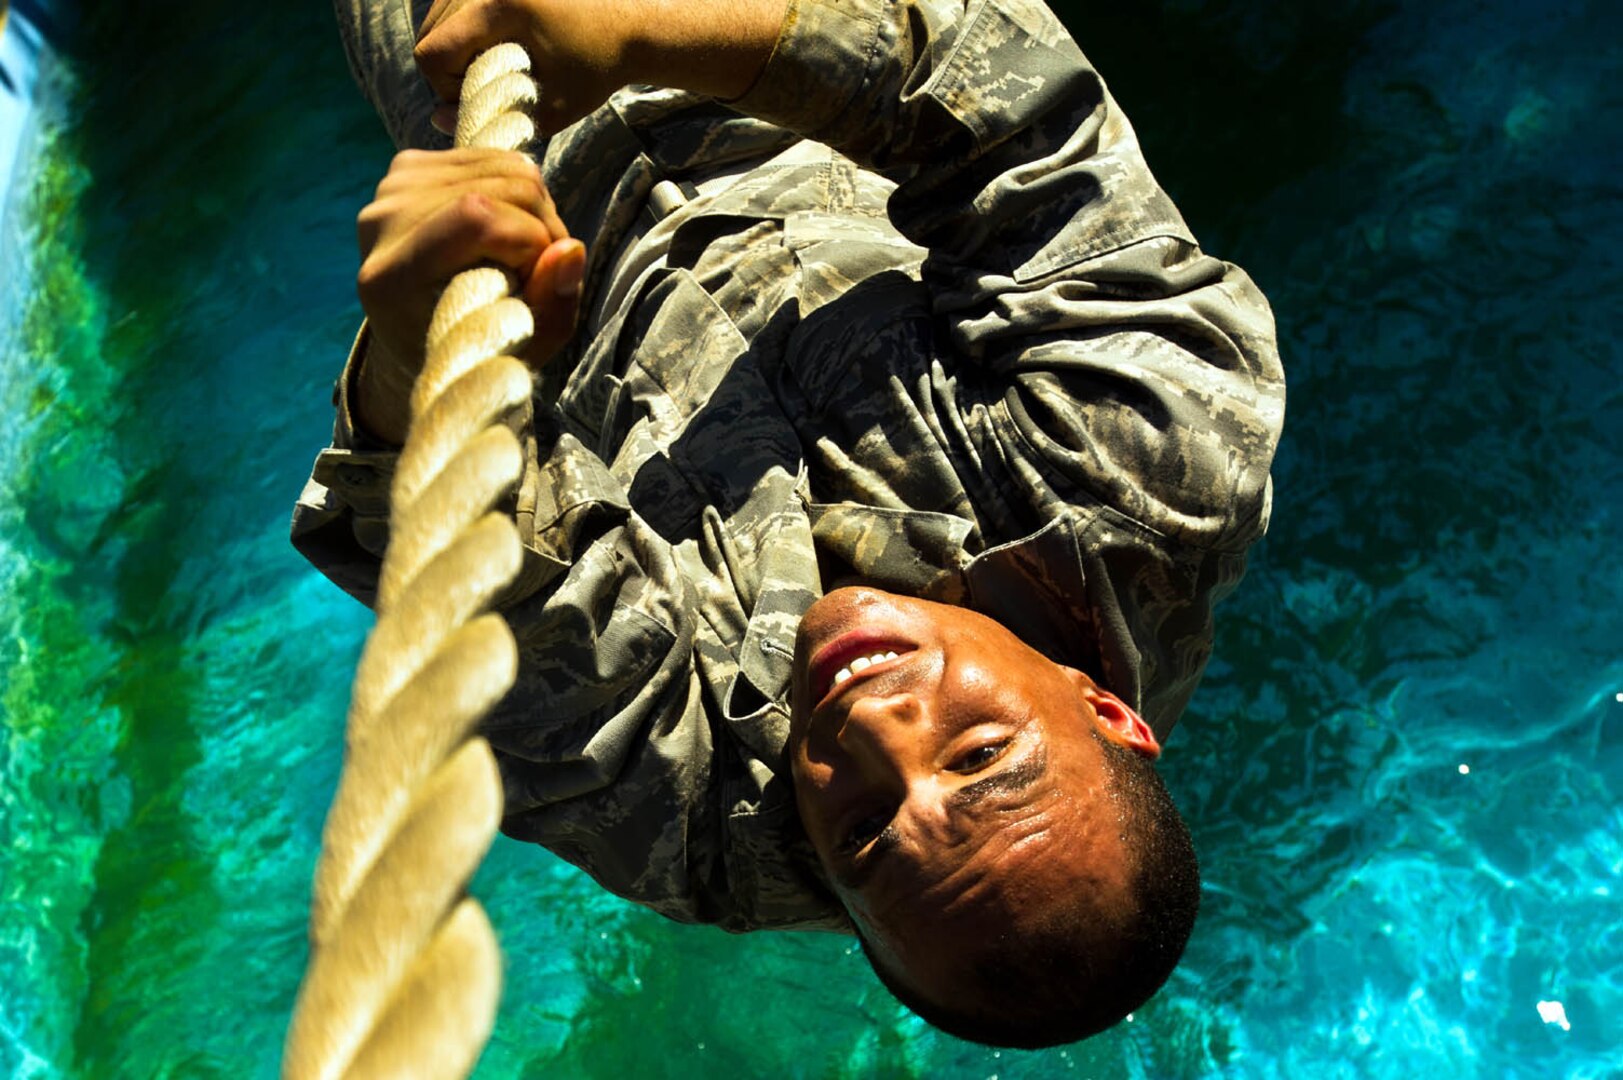 An Air Force basic military trainee attempts to finish an obstacle without falling off July 25 at Lackland Air Force Base. The obstacle course consists of 20 challenges designed to test strength, endurance and will power. (U.S. Air Force photo/Staff Sgt. Jonathan Snyder)